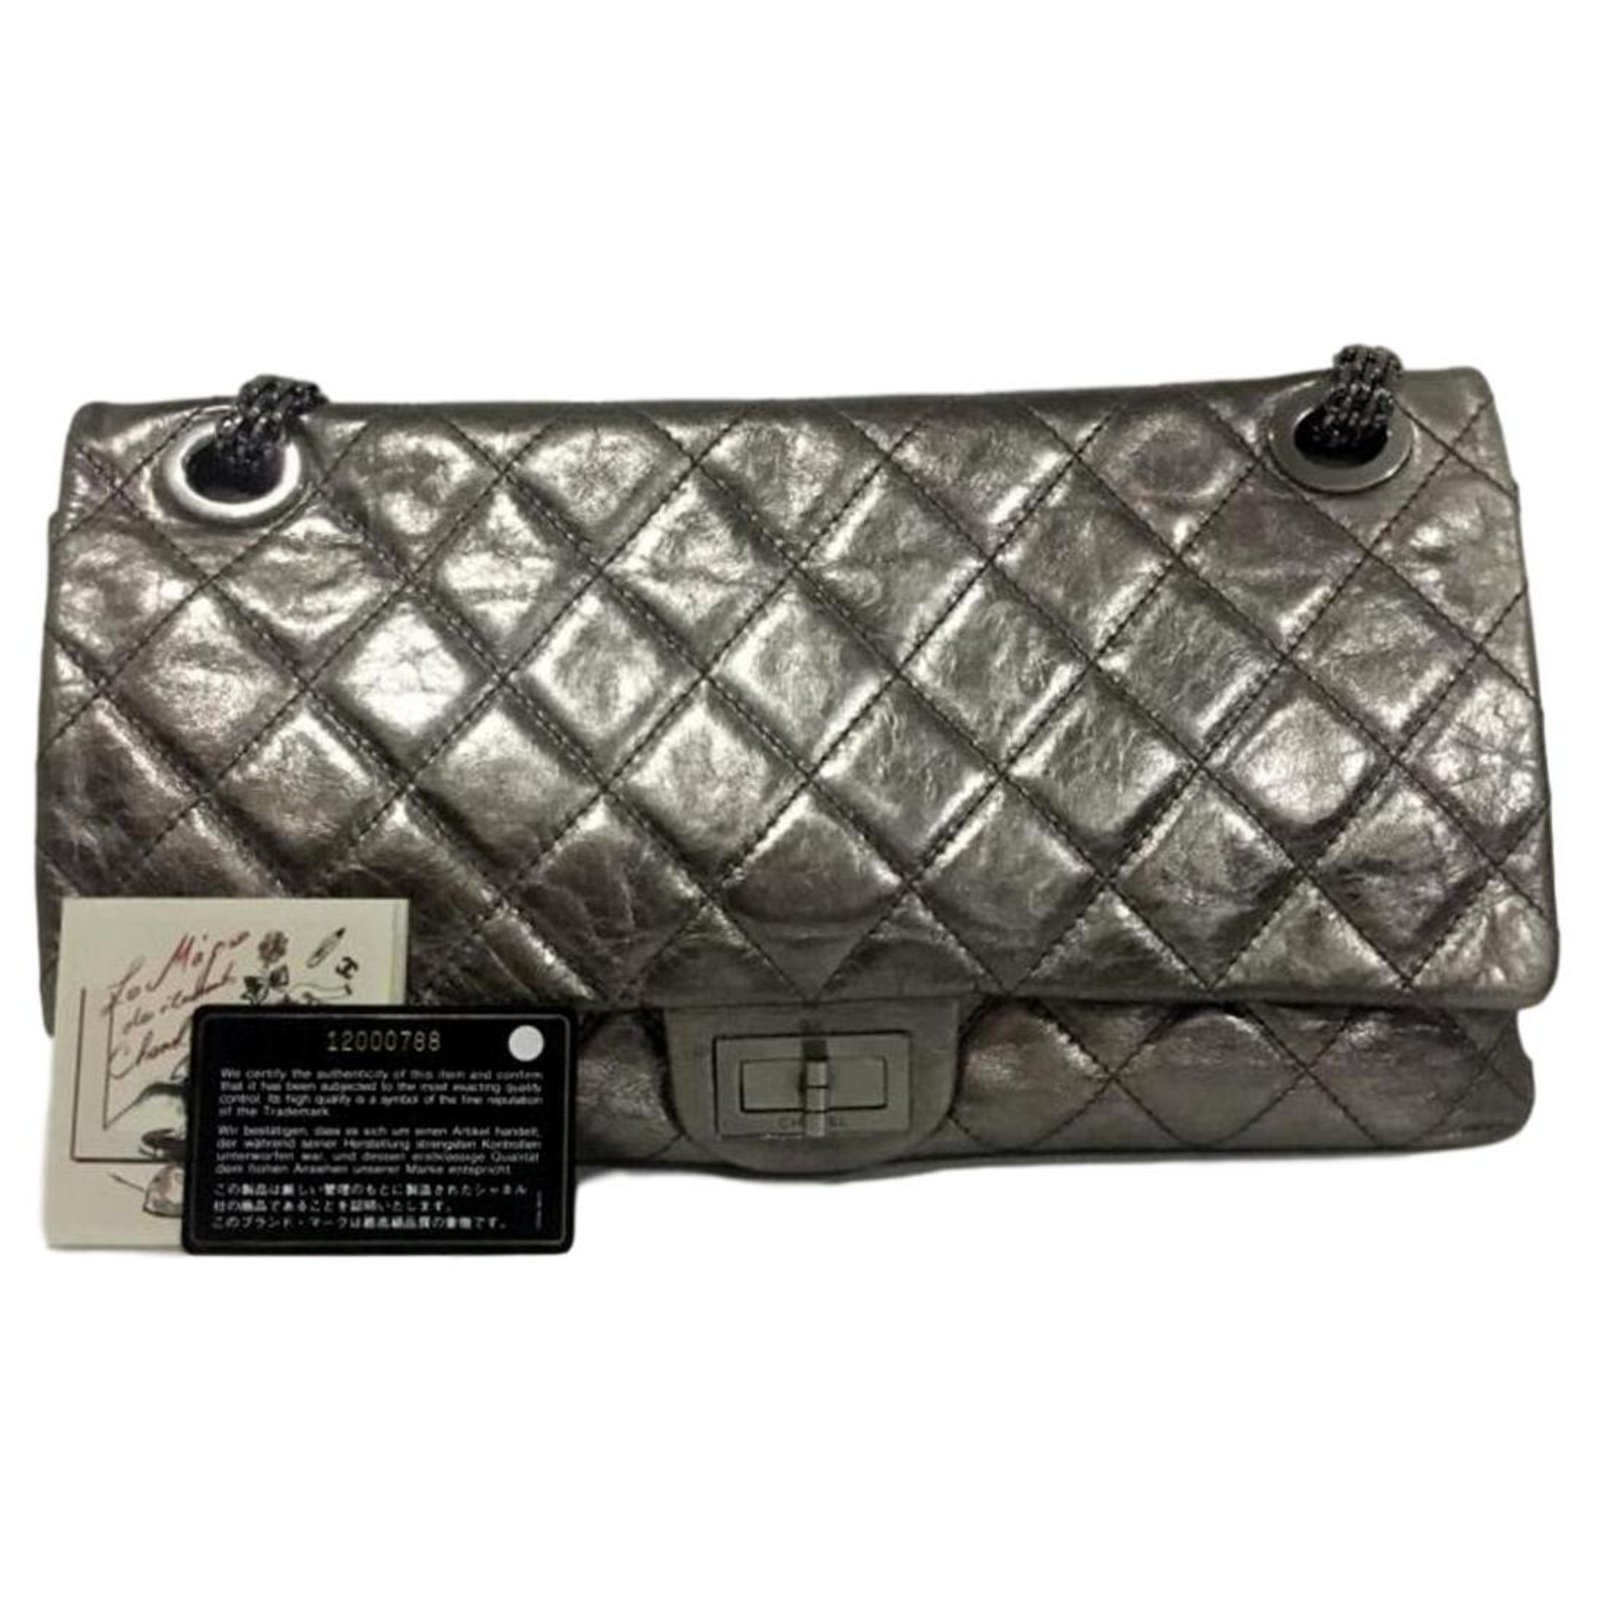 Sublime Chanel bag 2,55 classic timeless reissue metallic gray